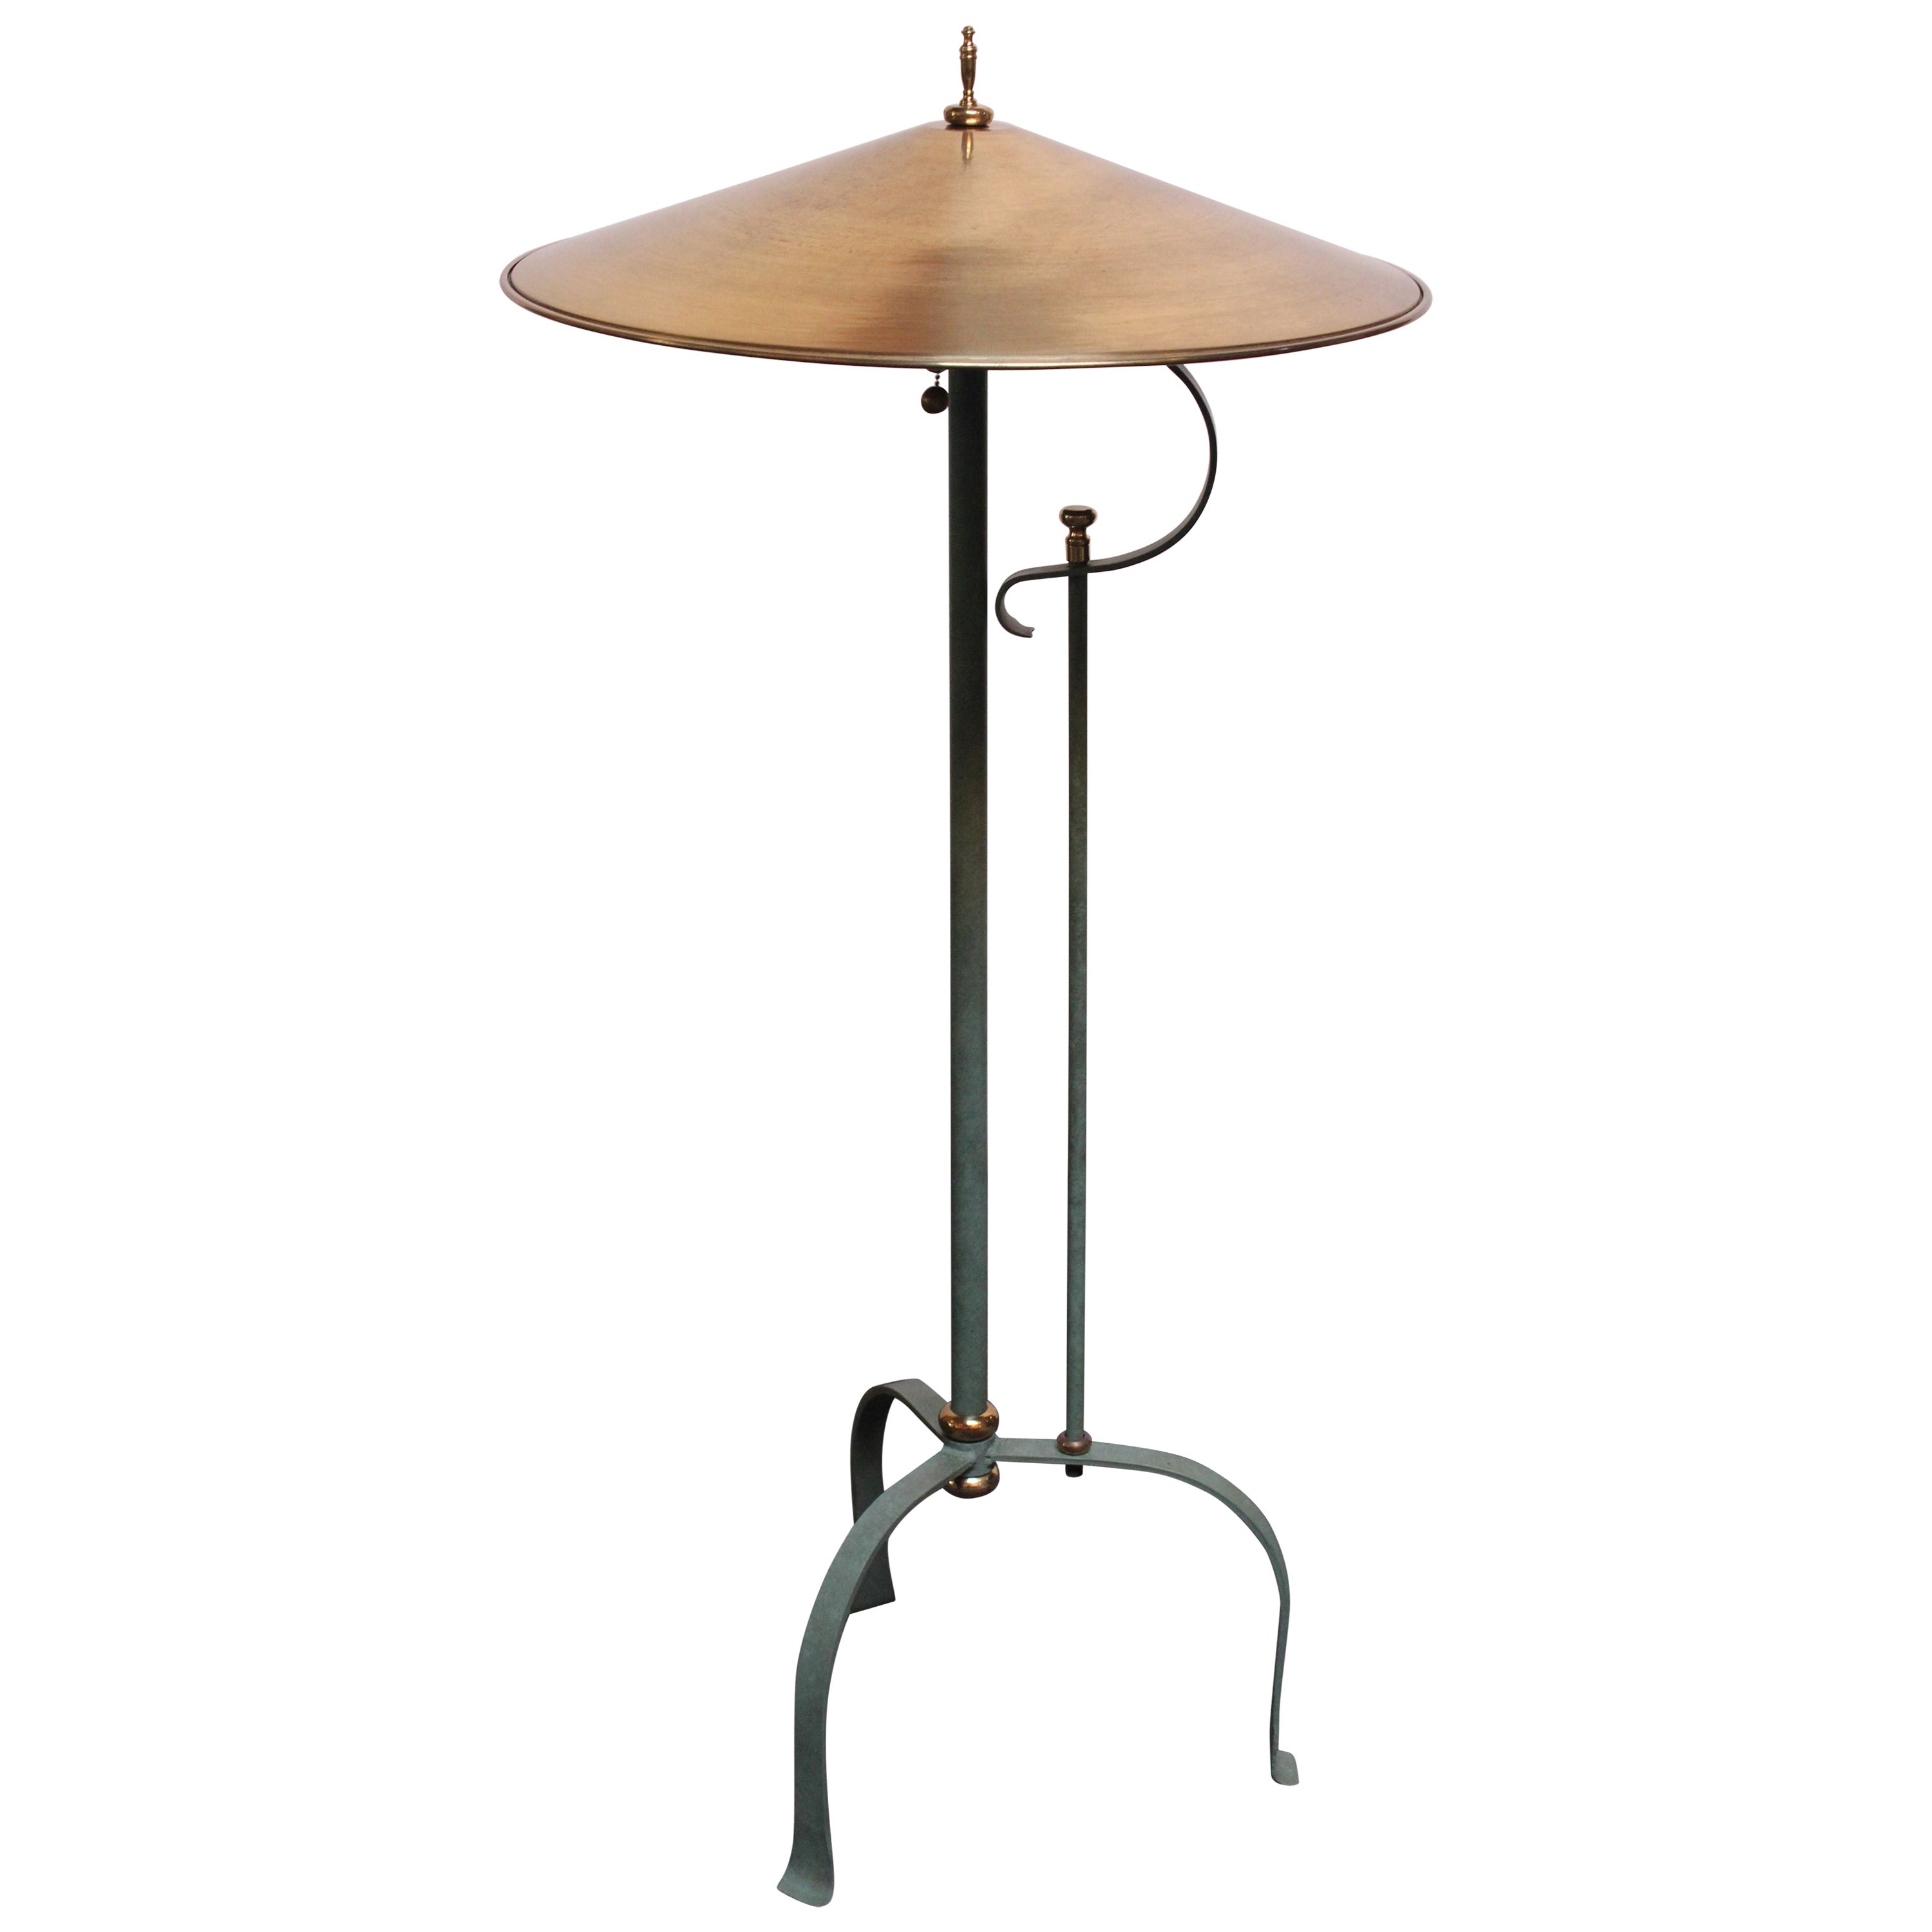 Postmodern Verdigris Finish Floor Lamp with Brass Shade and Tripod Base